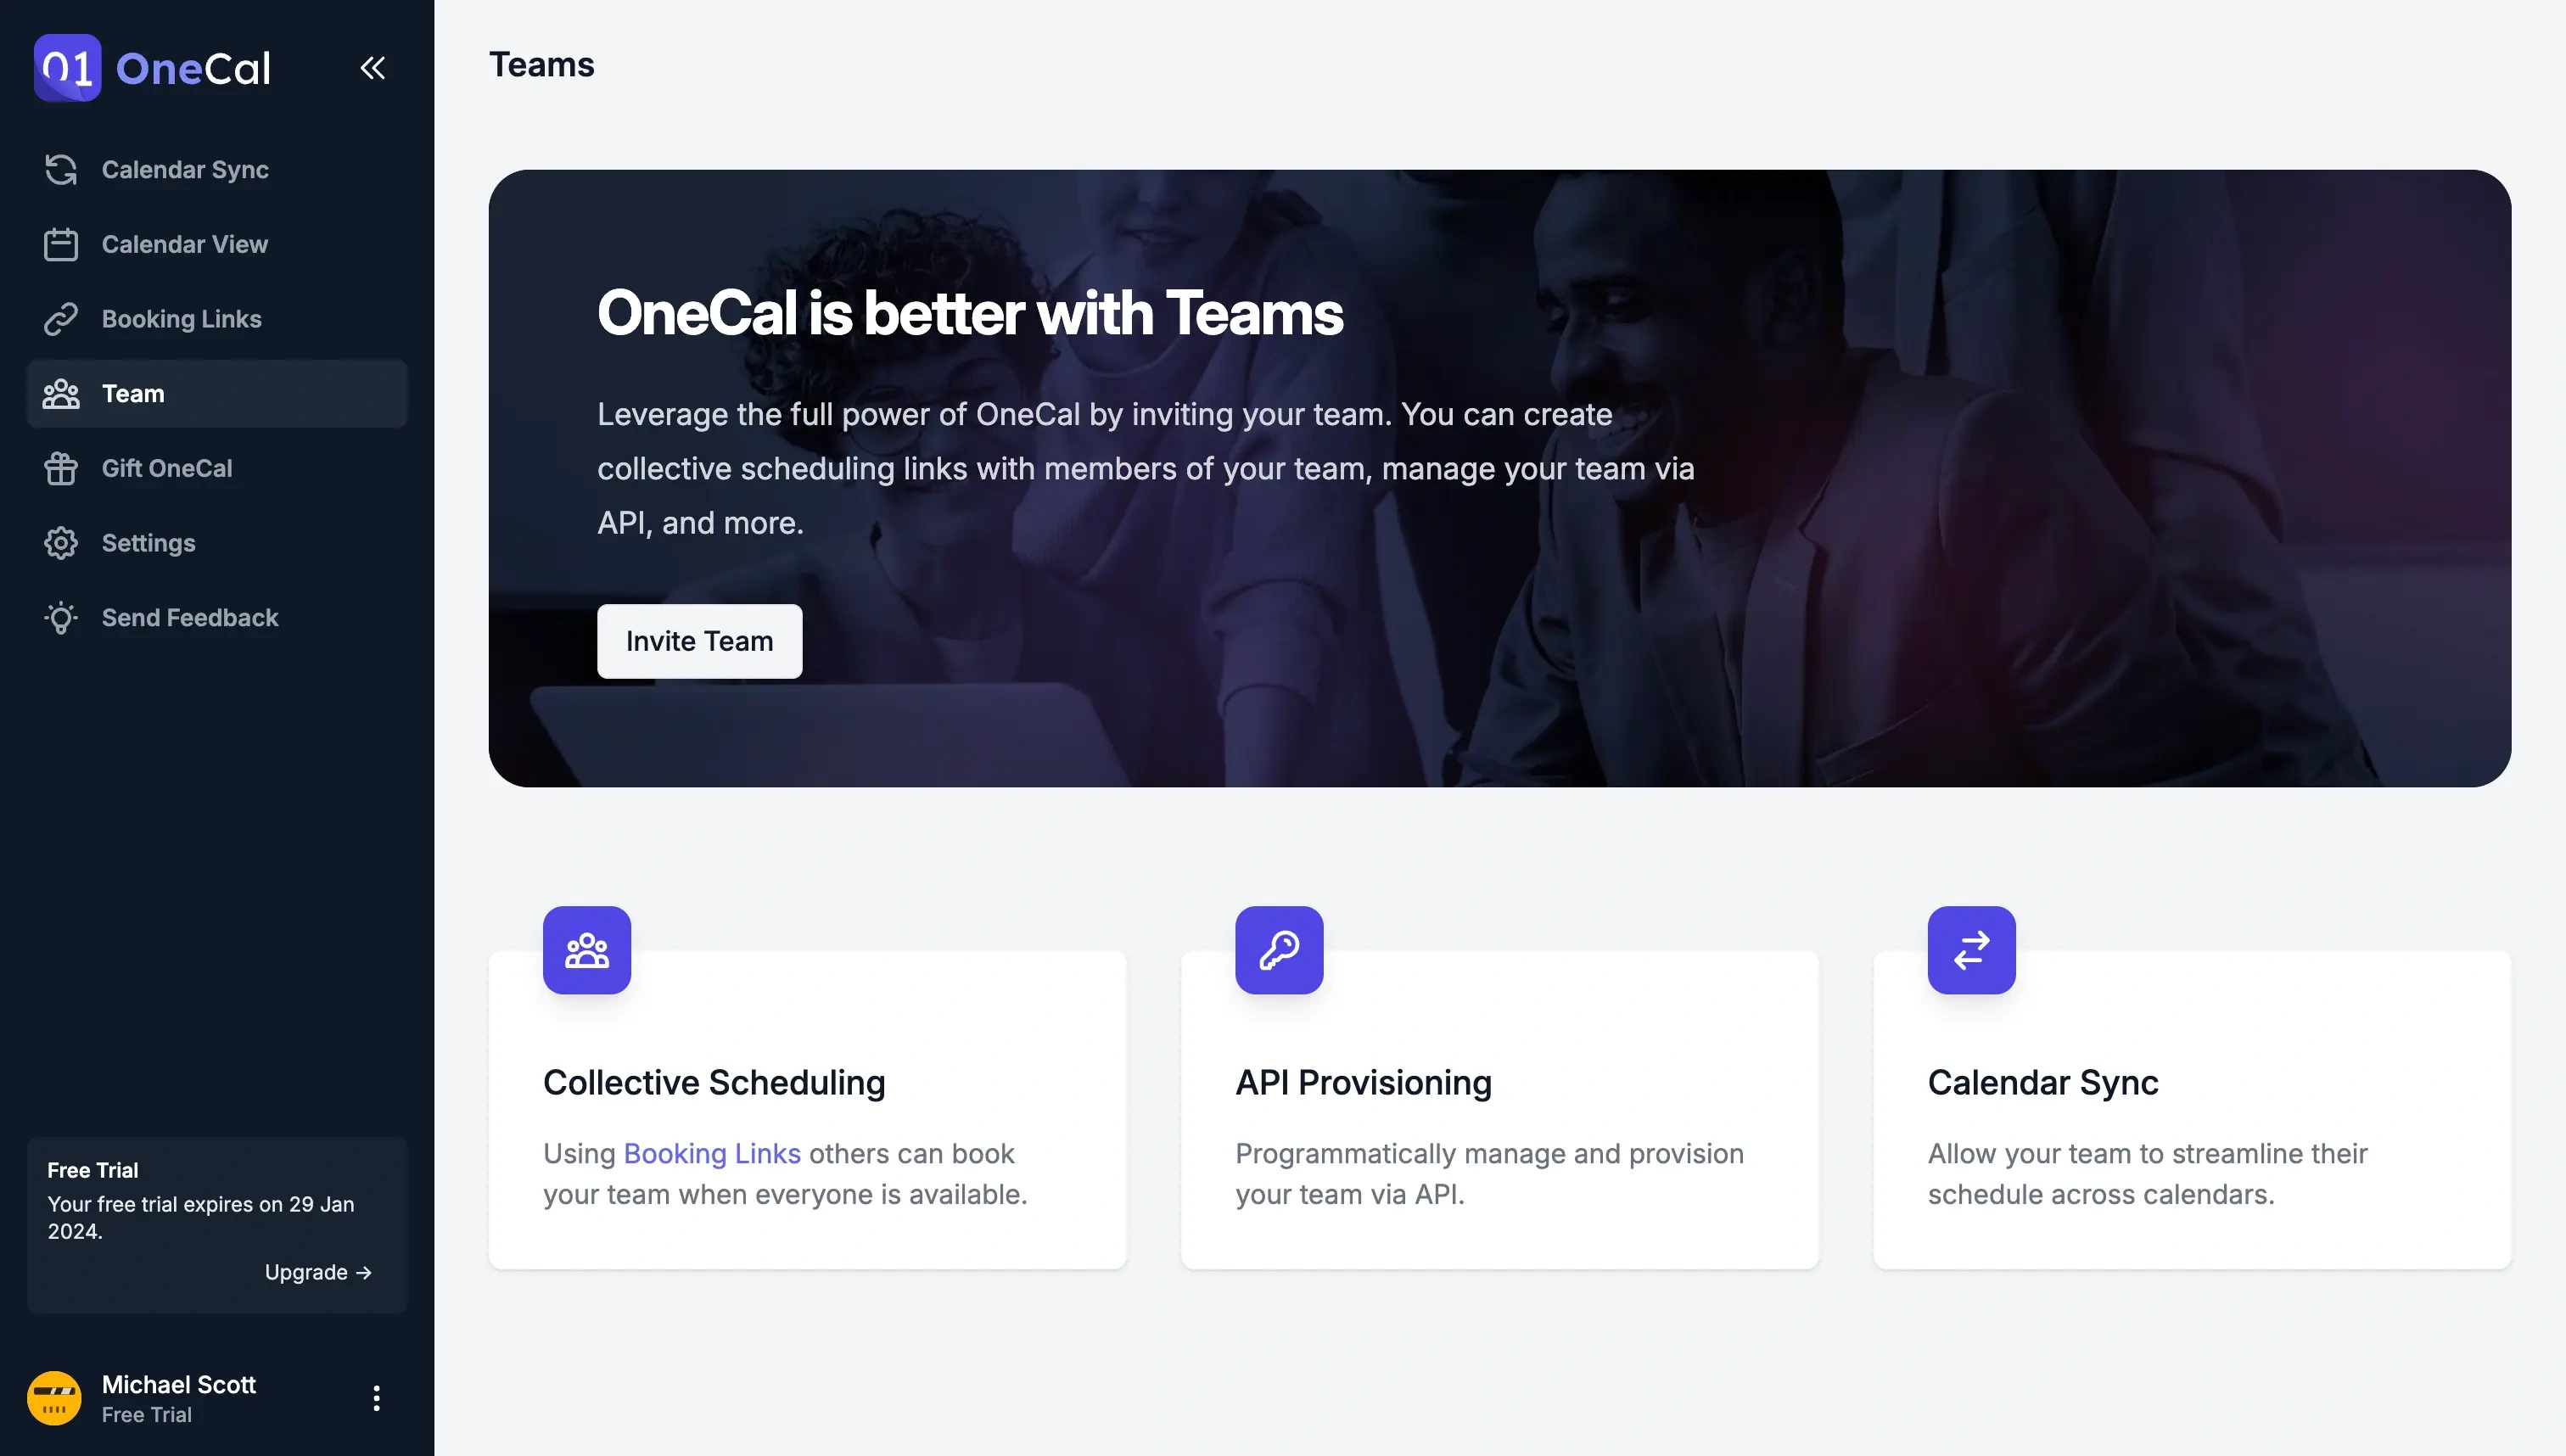 The OneCal Manage Teams UI